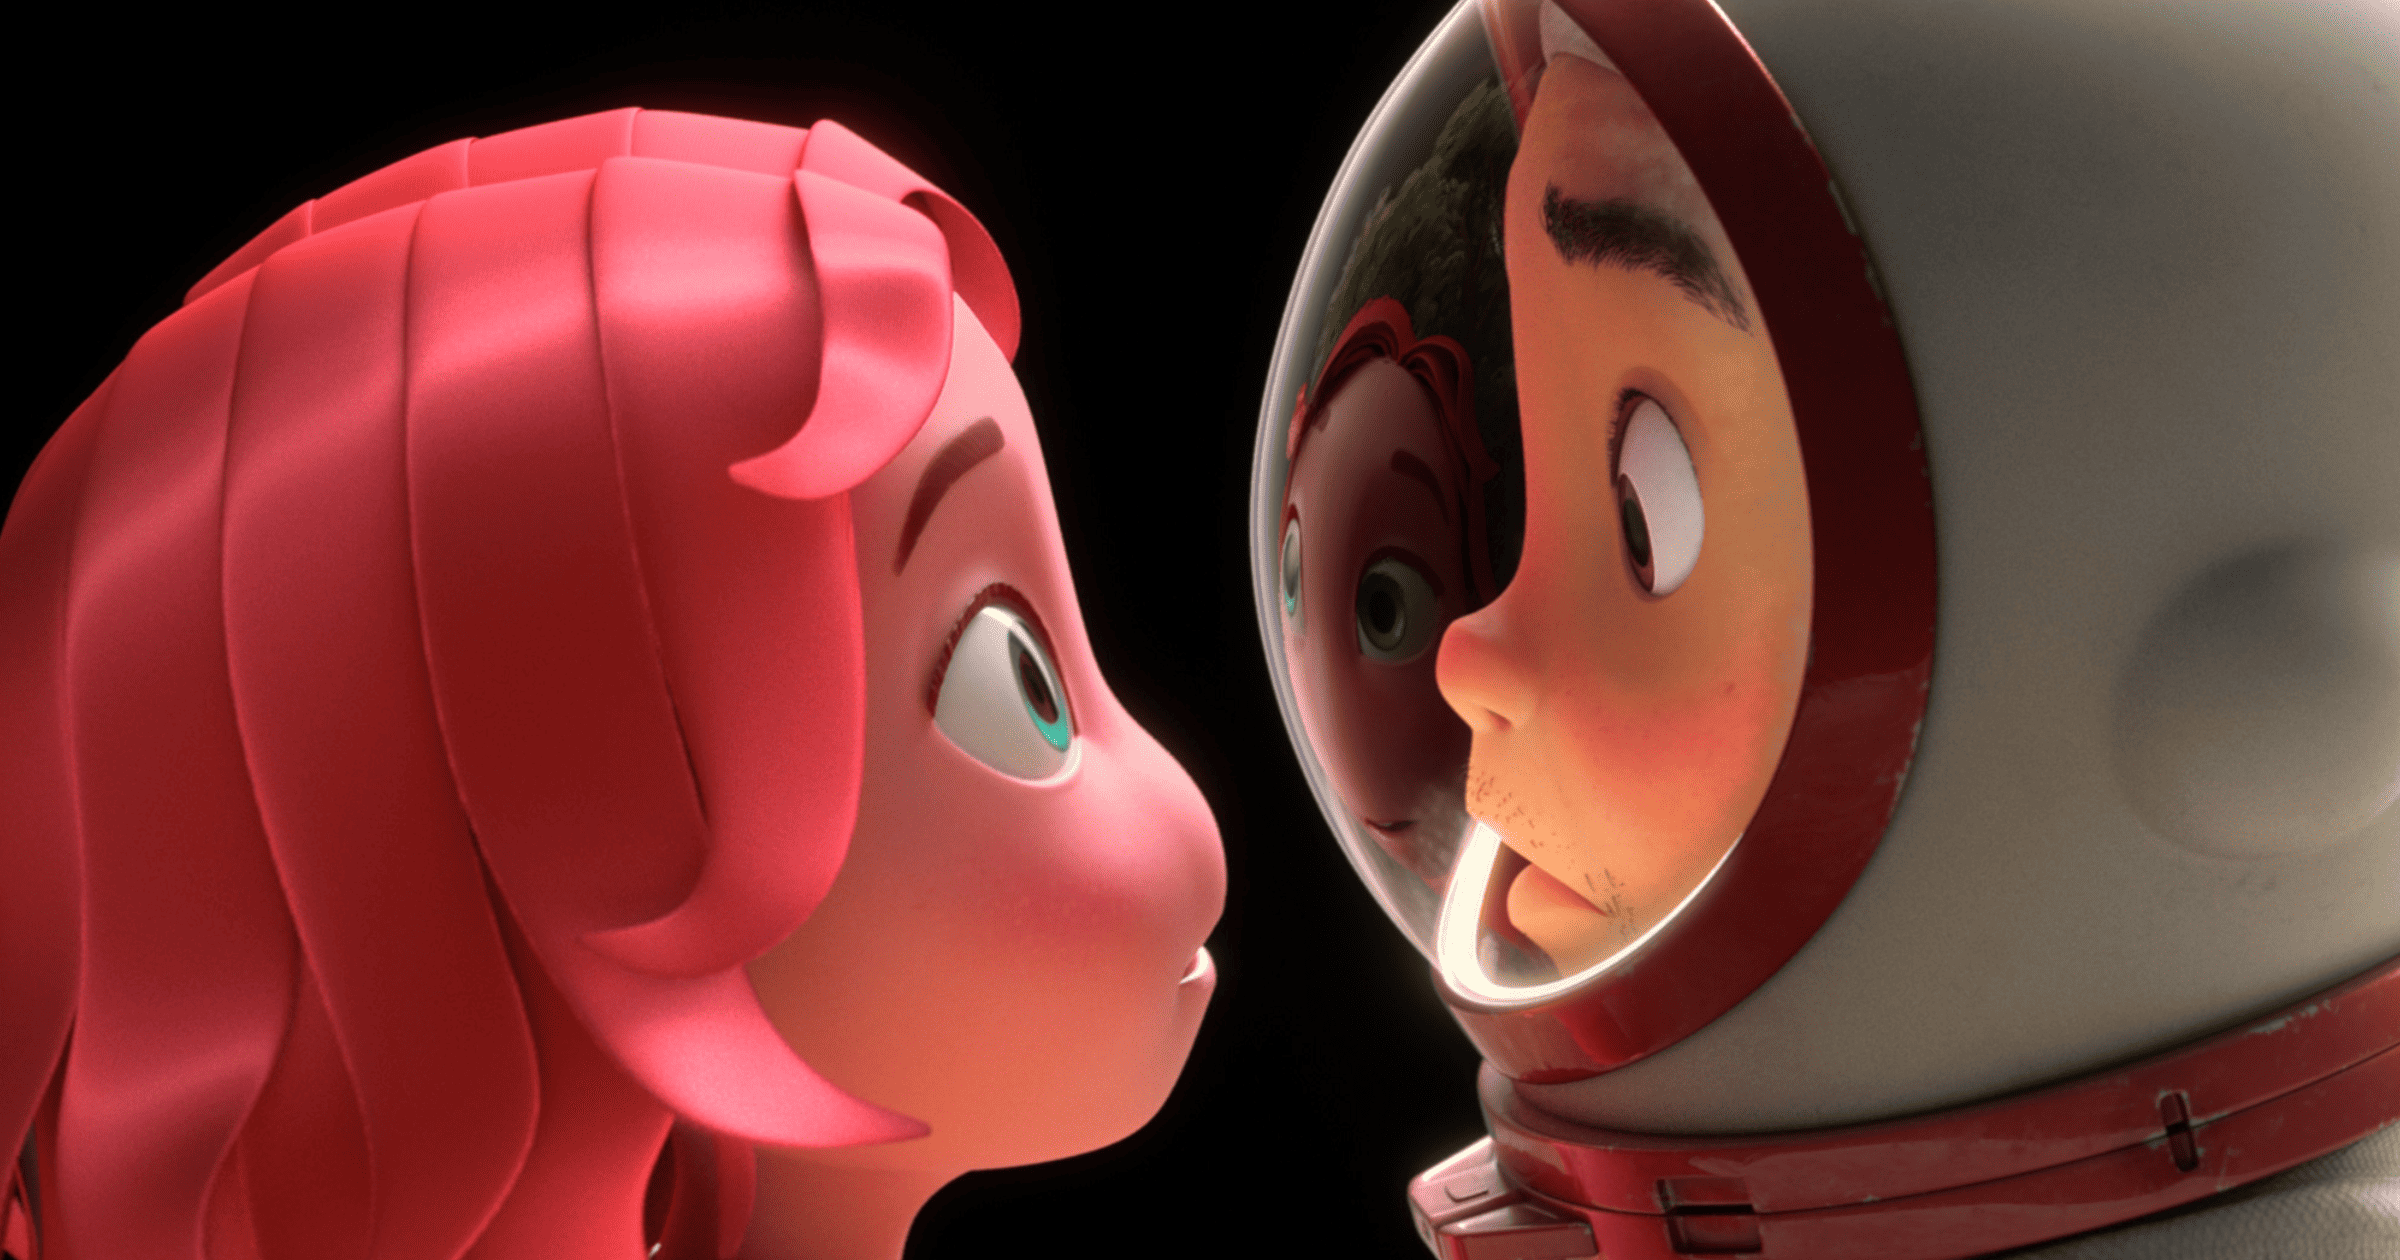 Apple TV+: Animated Short ‘Blush’, Exec Produced by Pixar Legend, to Premiere on Friday